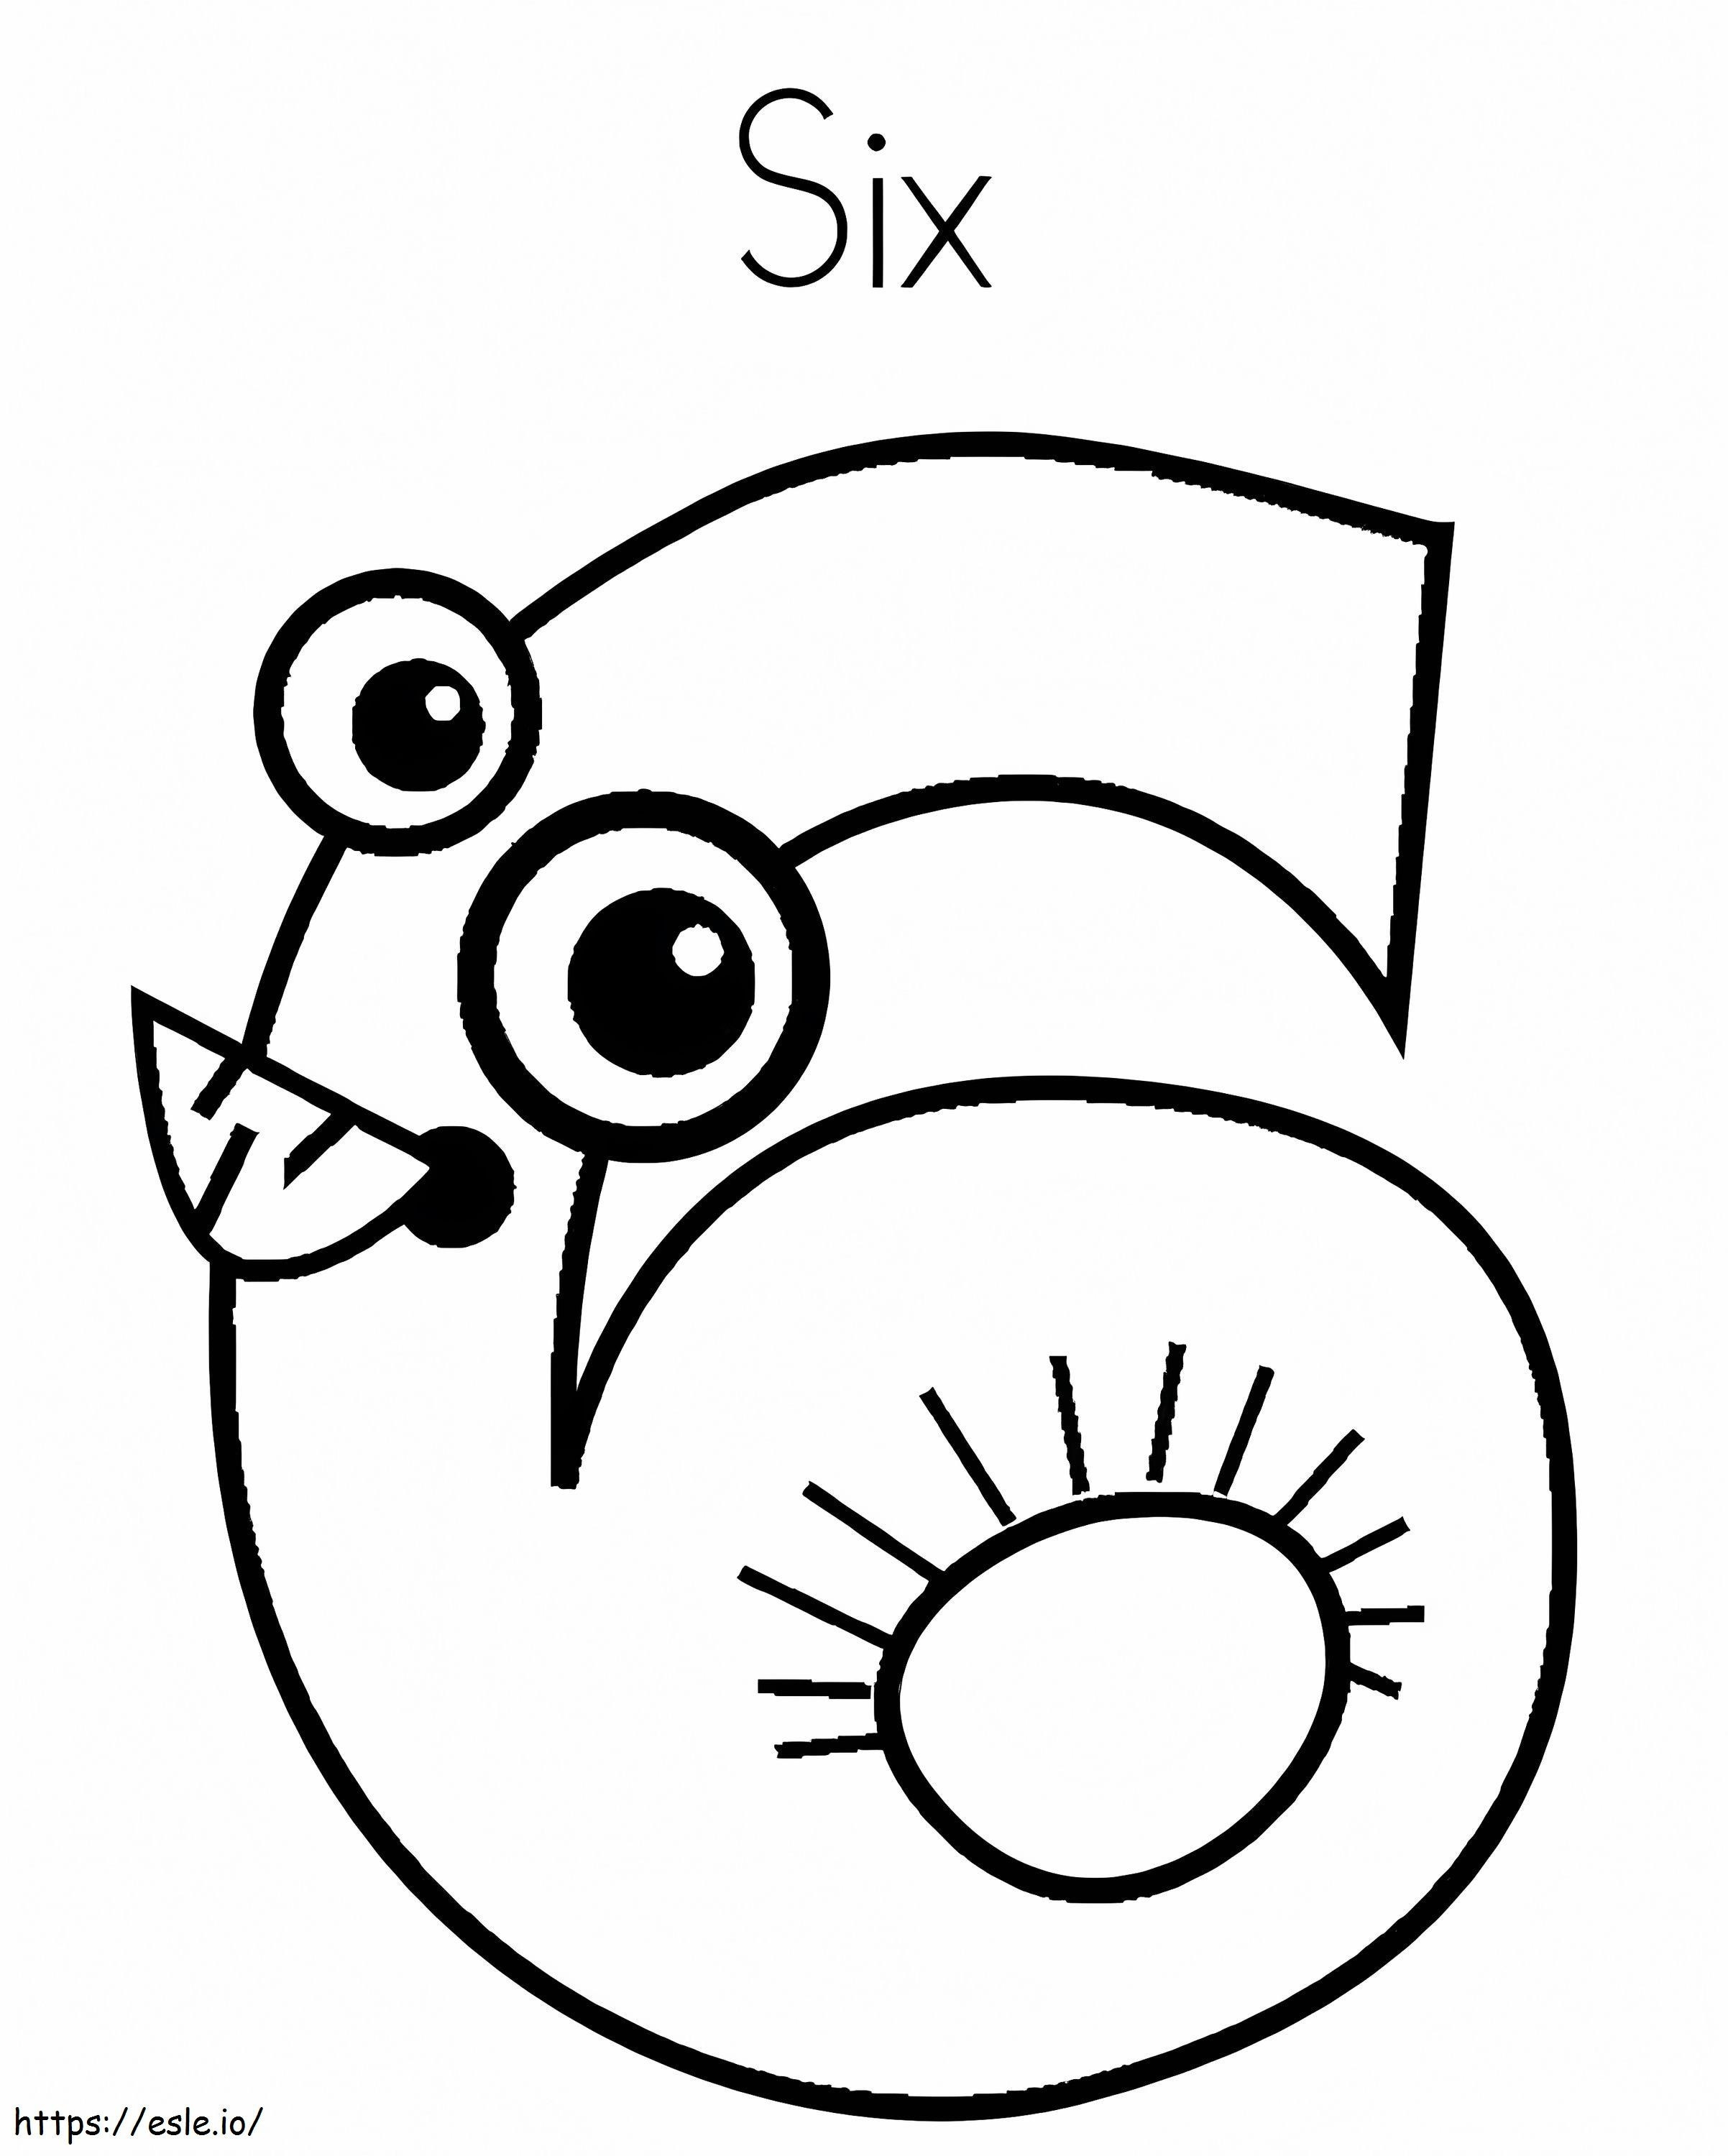 Crazy Number 6 coloring page